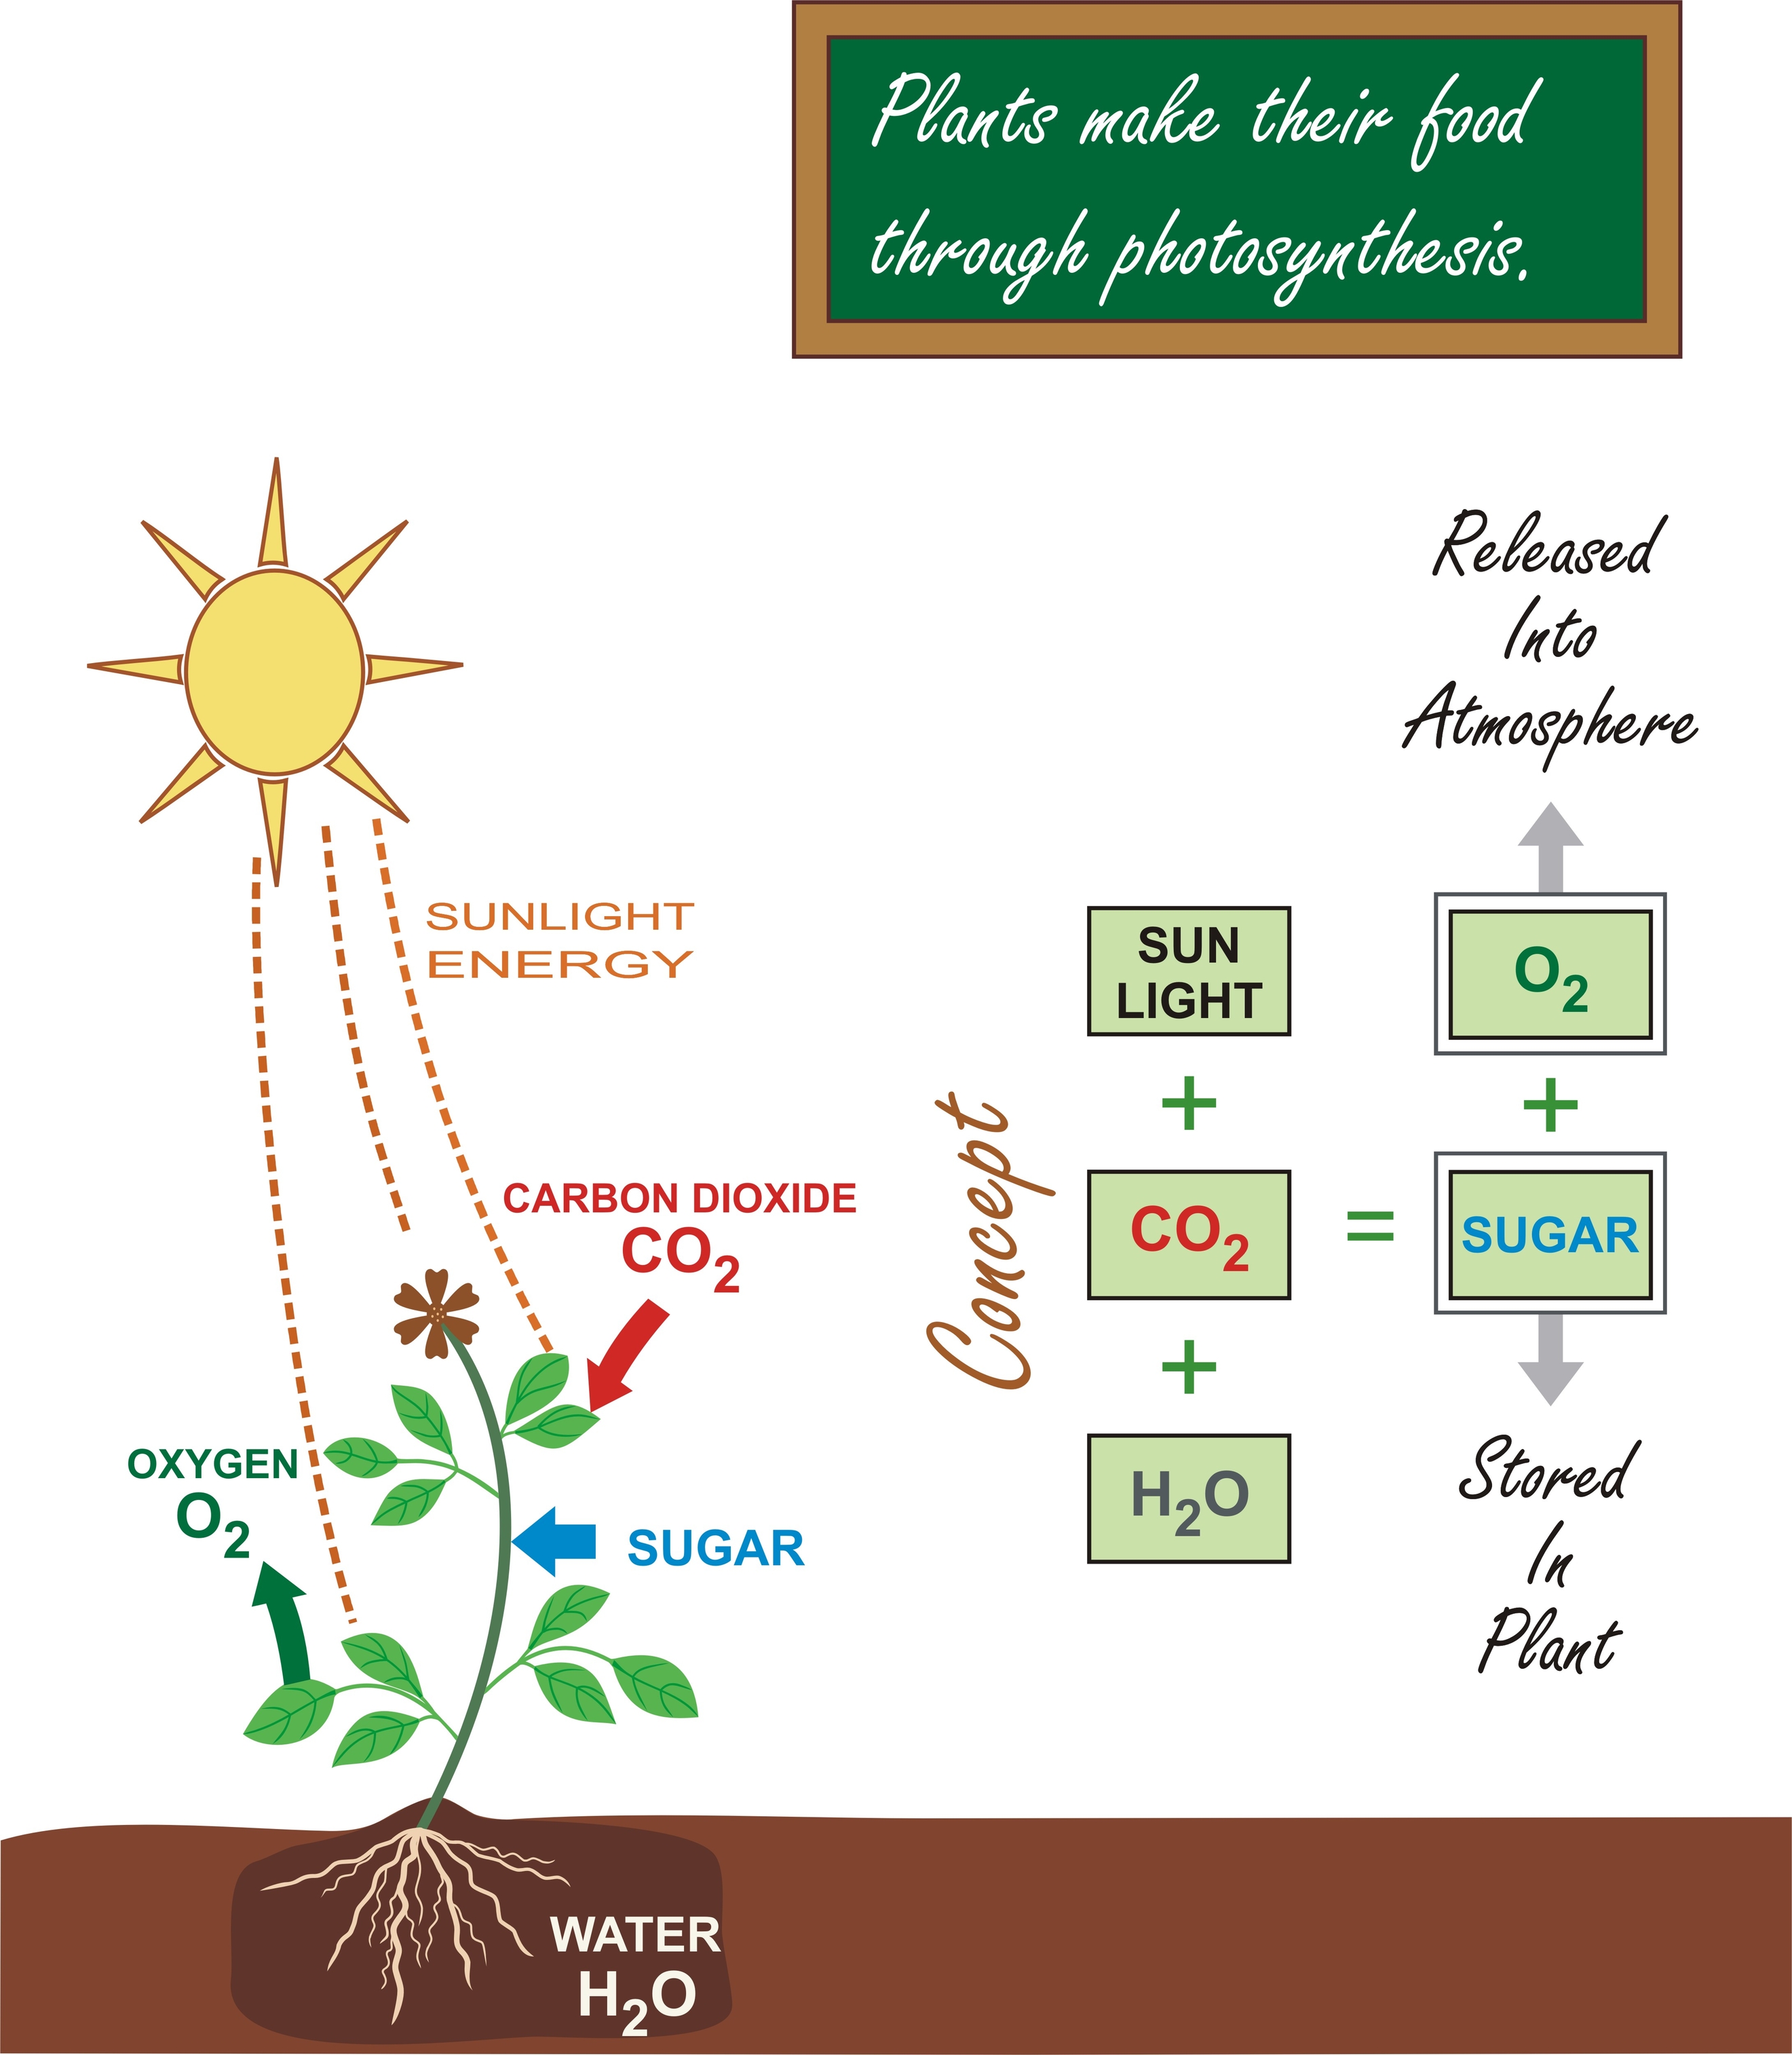 research article about photosynthesis